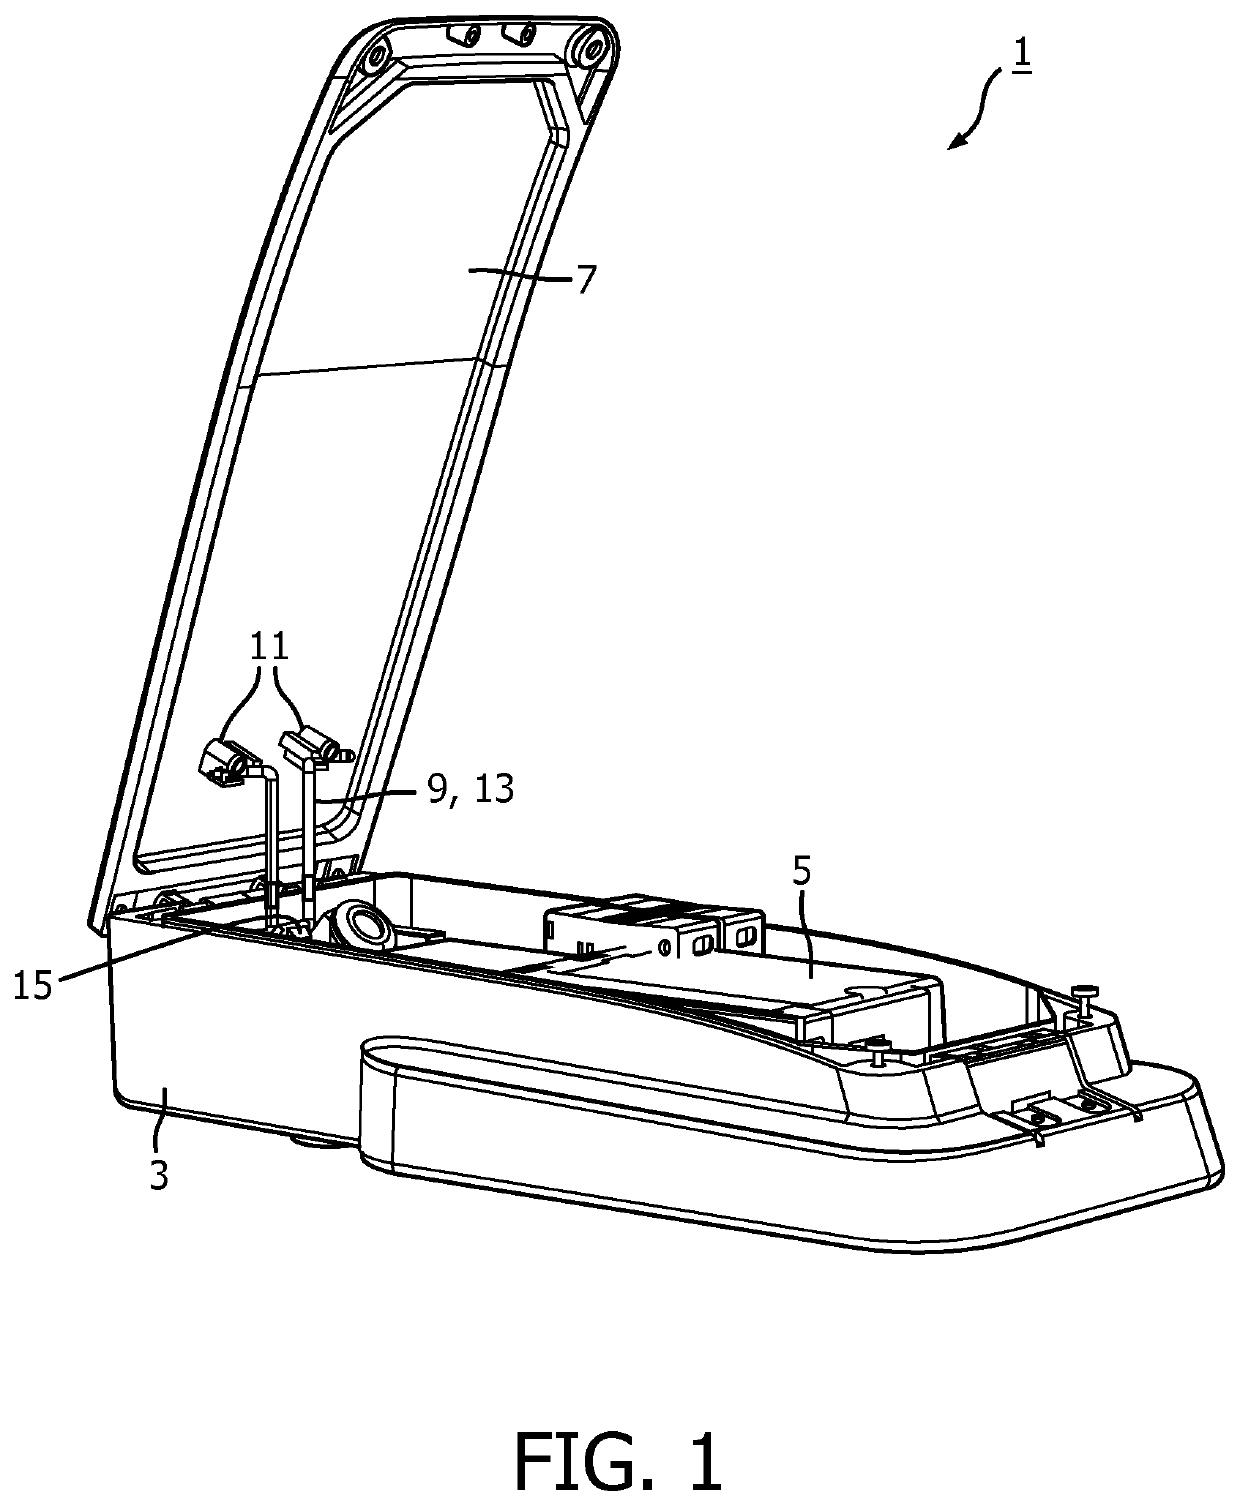 Stand and lighting device